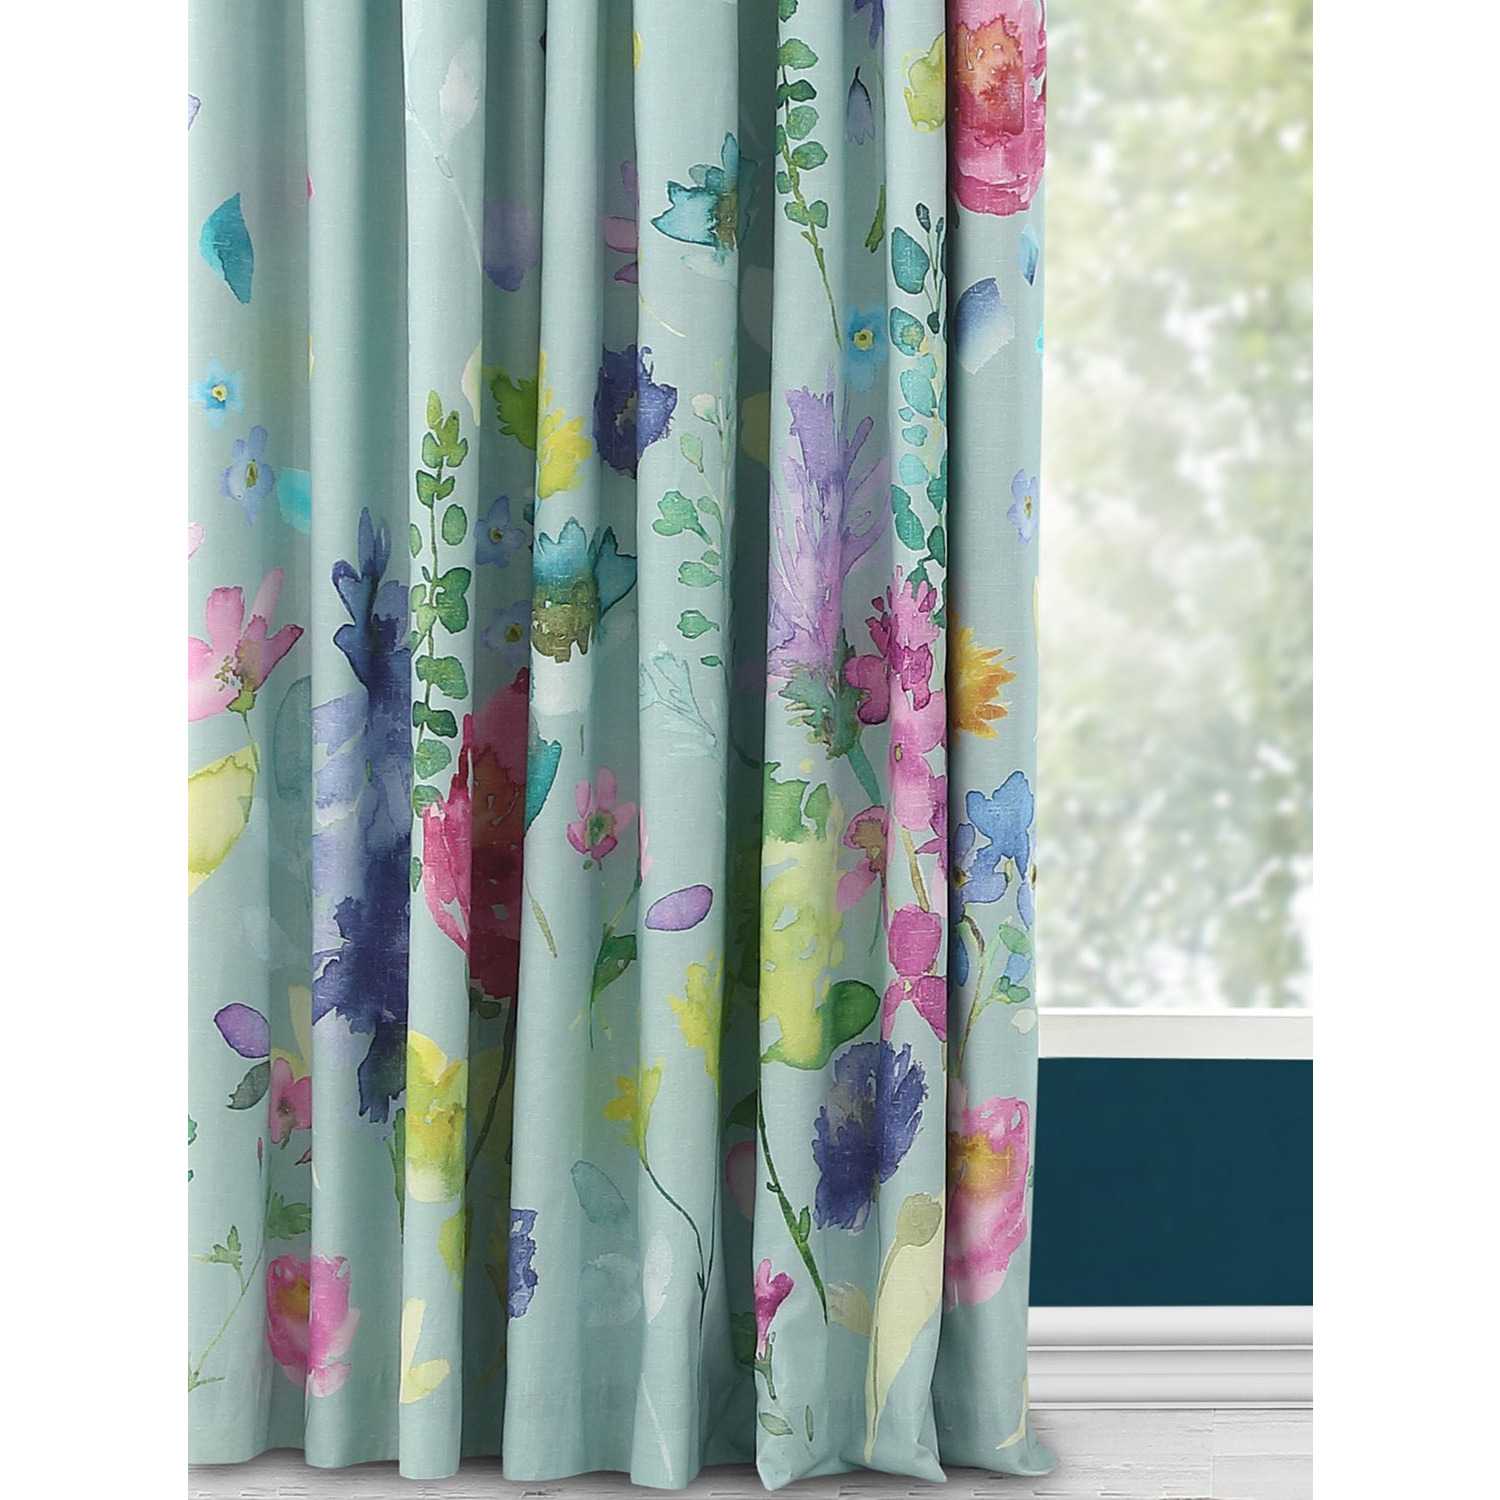 bluebellgray Tetbury Pair Blackout Lined Pencil Pleat Curtains, Duck Egg - image 1